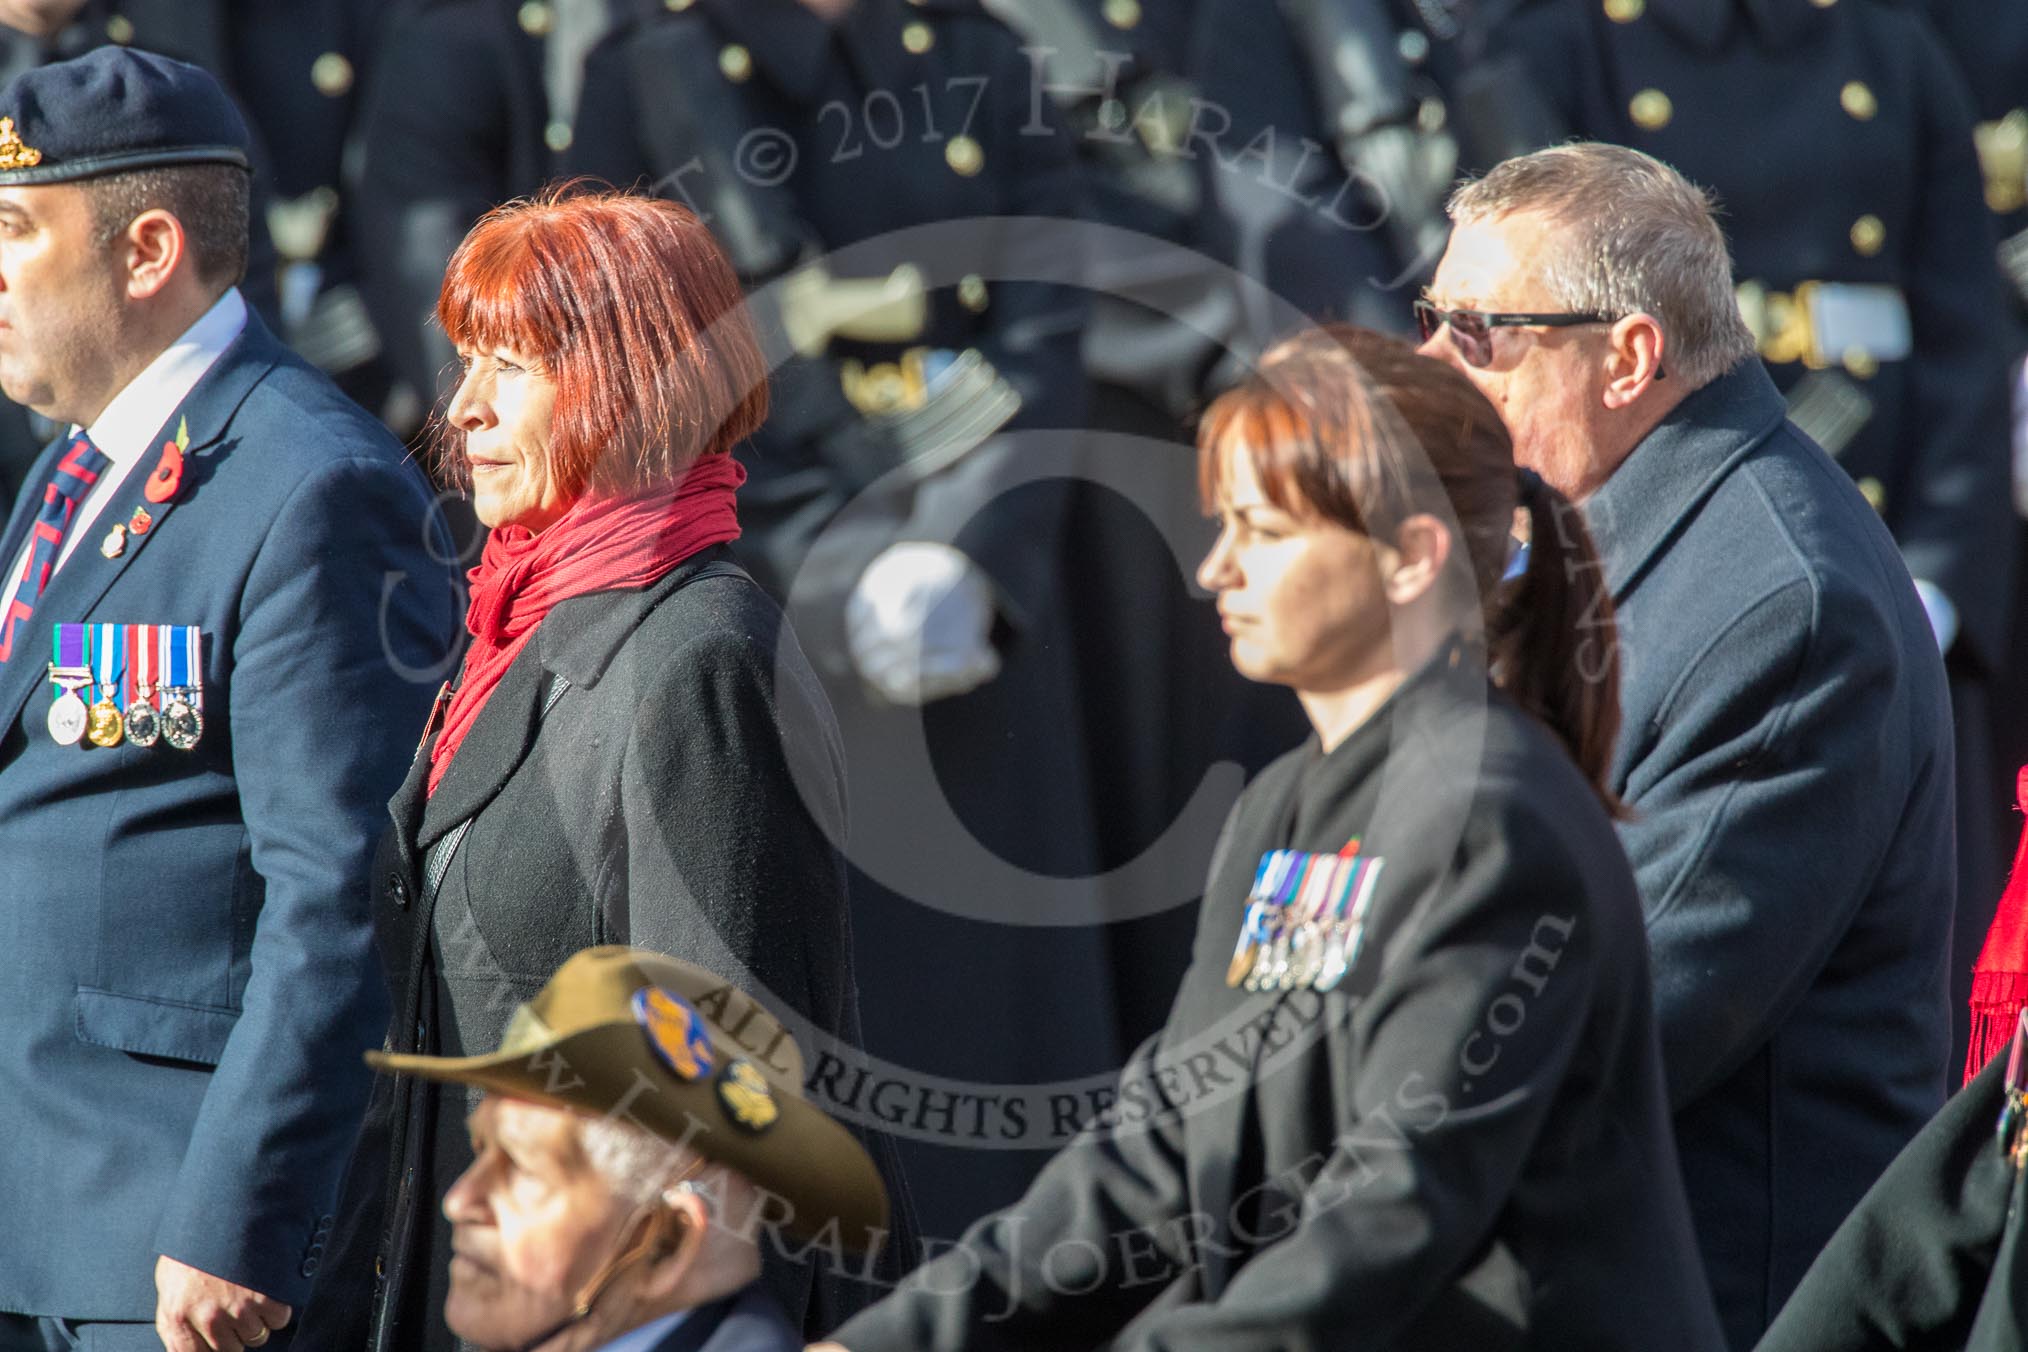 Chindit Society (Group F21, 15 members) during the Royal British Legion March Past on Remembrance Sunday at the Cenotaph, Whitehall, Westminster, London, 11 November 2018, 11:53.